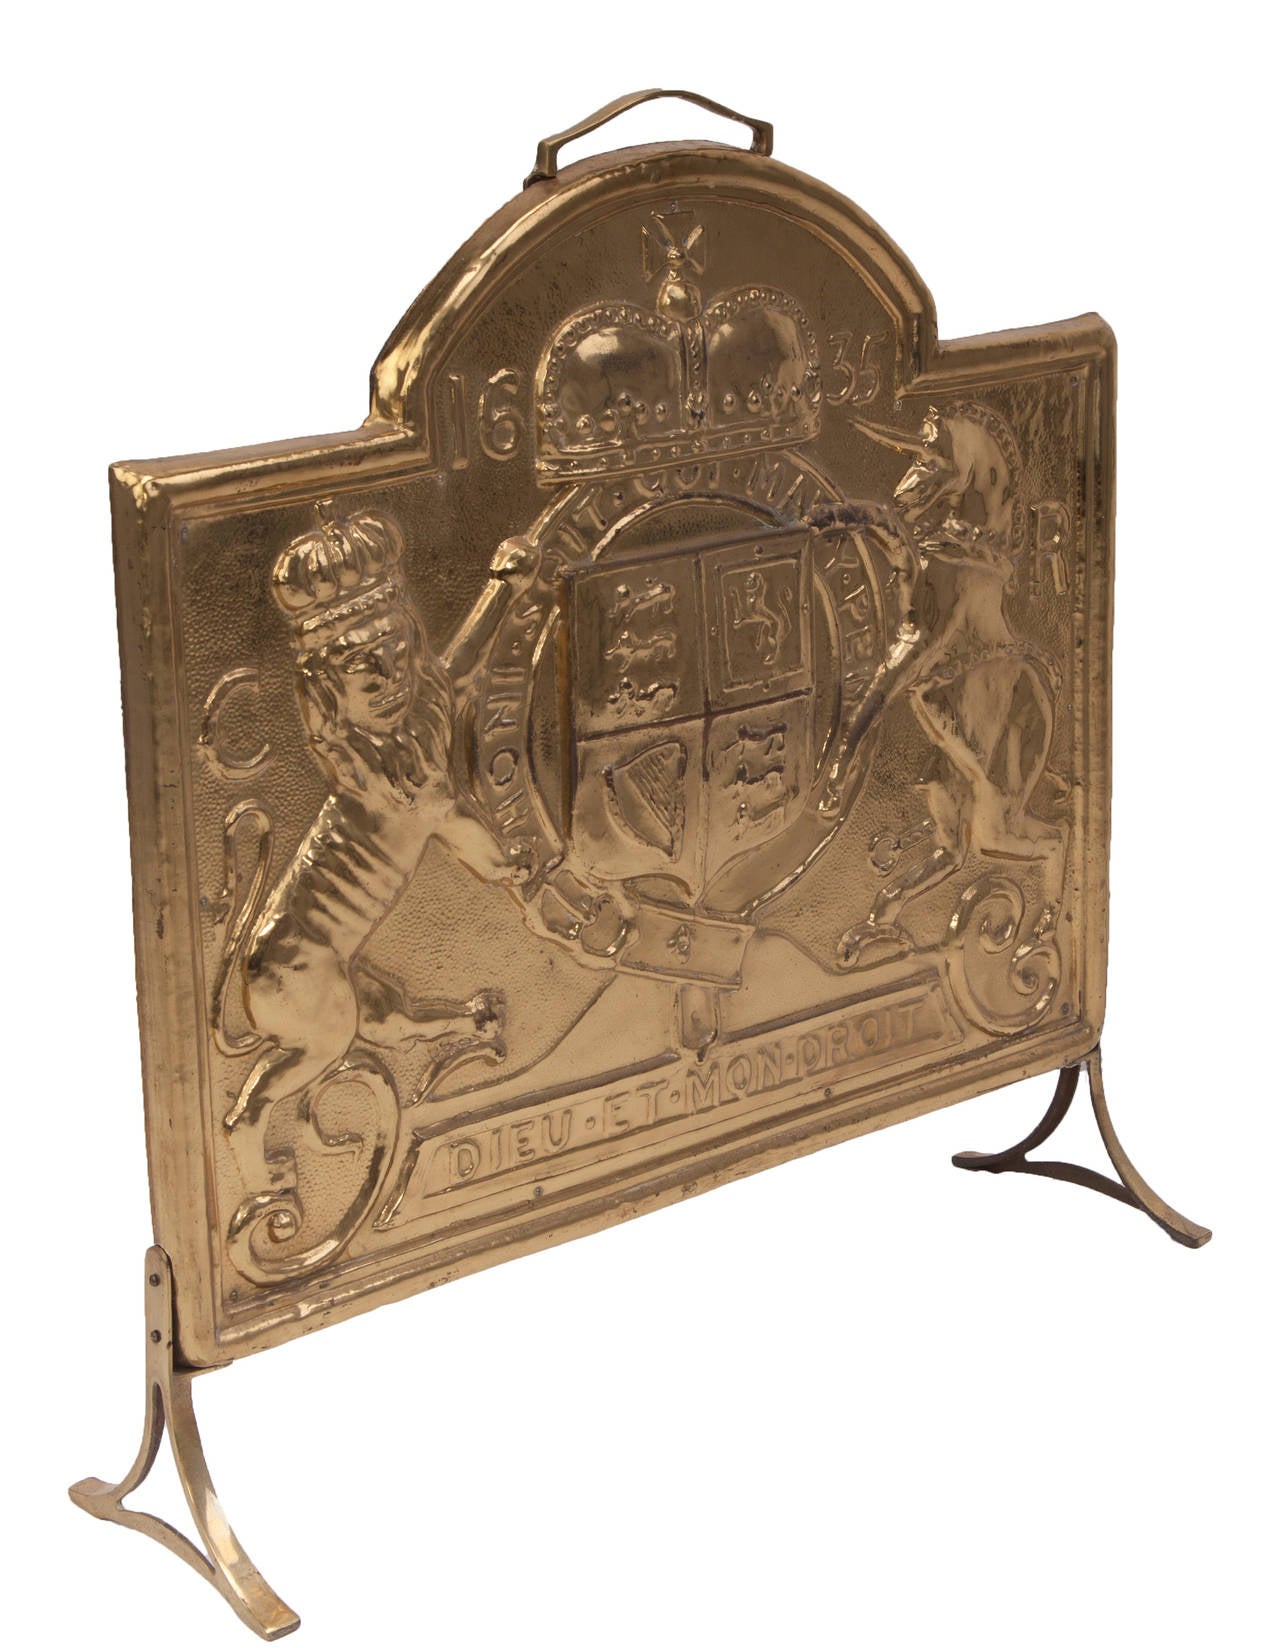 Colonial Williamsburg reproduction of a Repousse British brass fire screen of 1665. Embossed British Royal Coat of Arms depicting 'The Lion and The Unicorn' with brass handle cast brass feet.